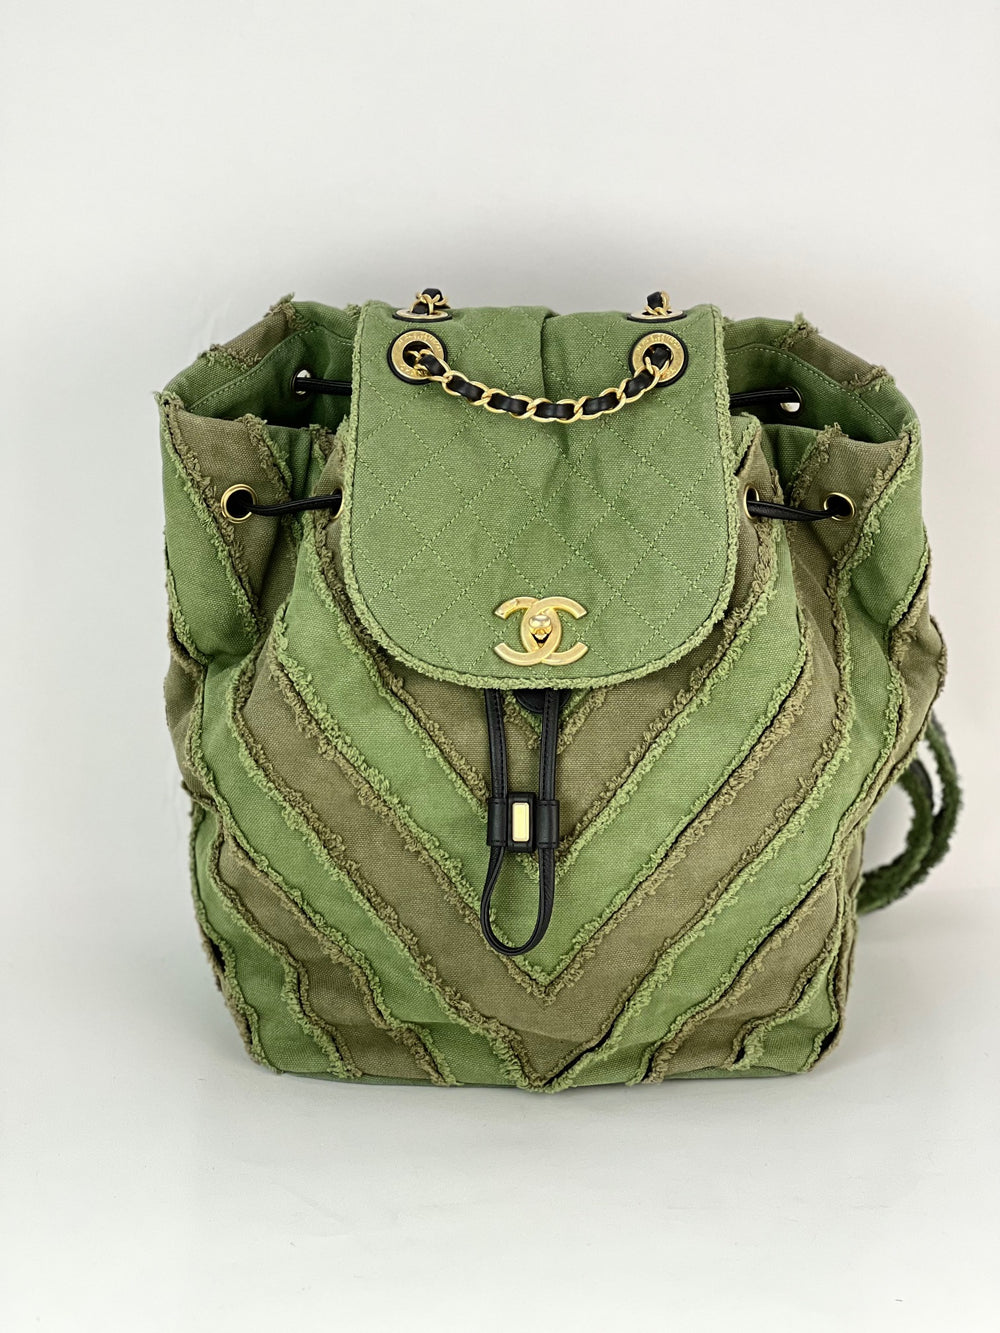 CHANEL Backpack Canvas Chevron Cuba Patchwork Khaki Green Backpack Preowned